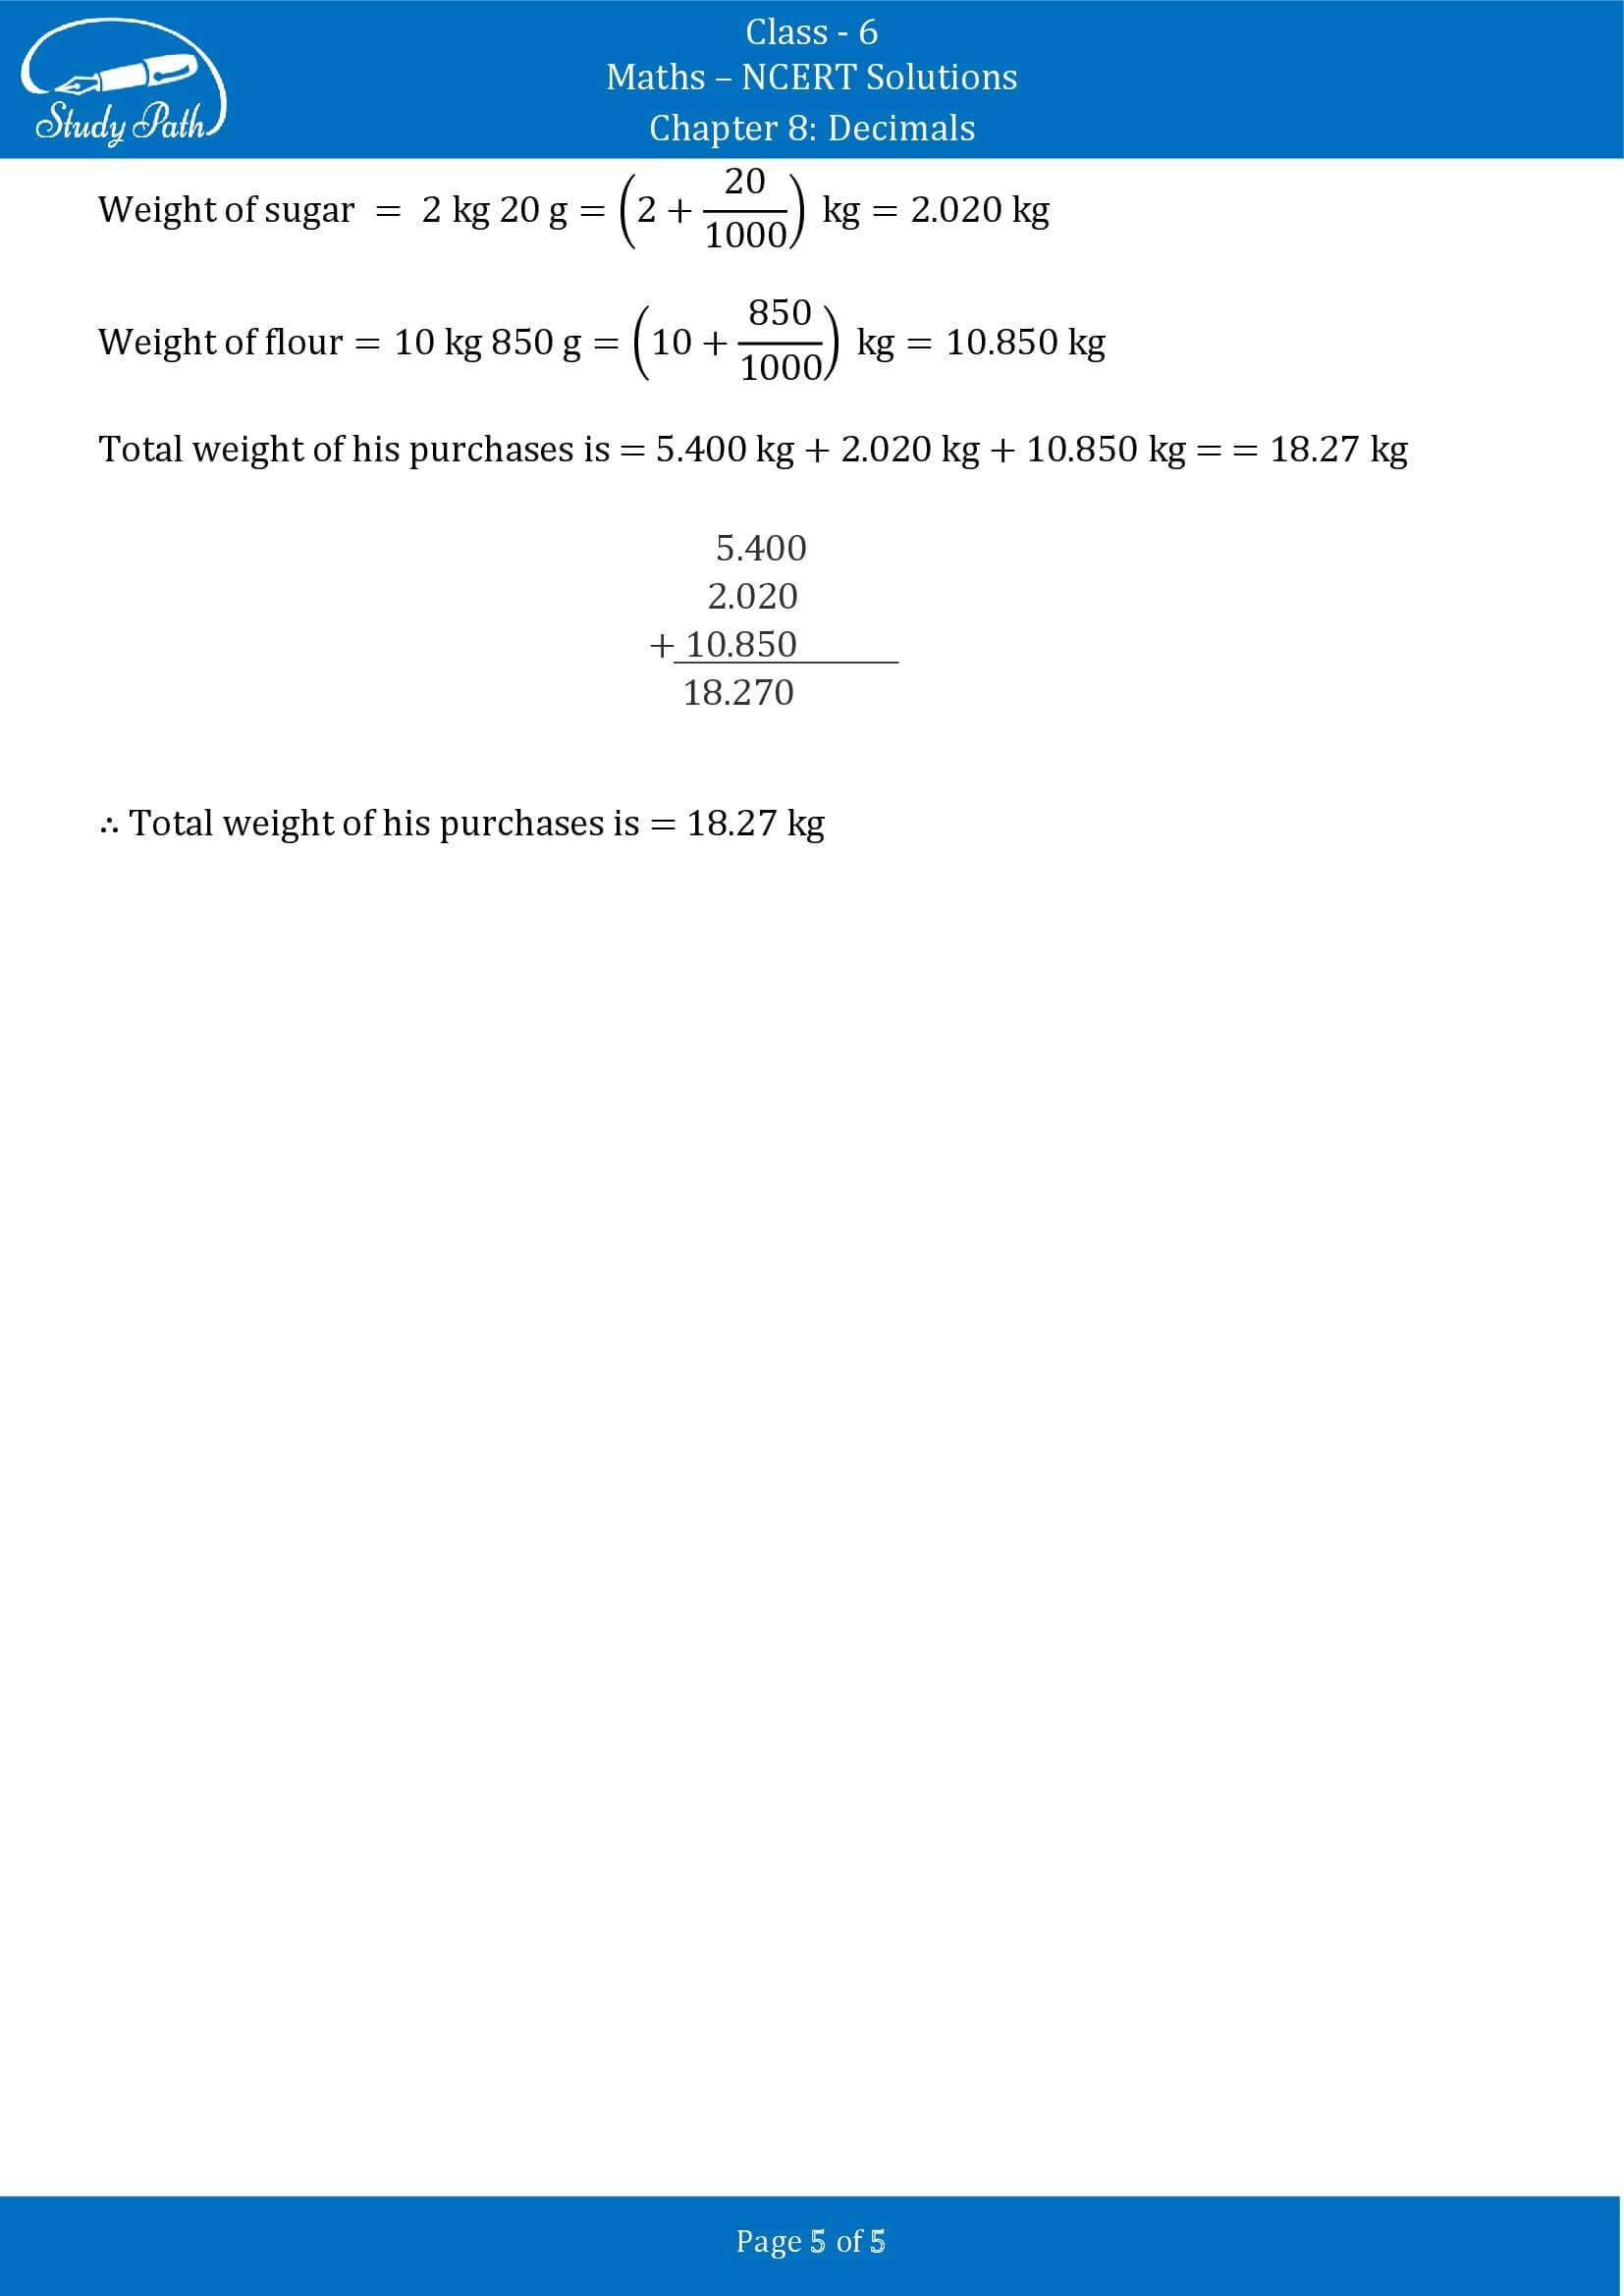 NCERT Solutions for Class 6 Maths Chapter 8 Decimals Exercise 8.5 00005